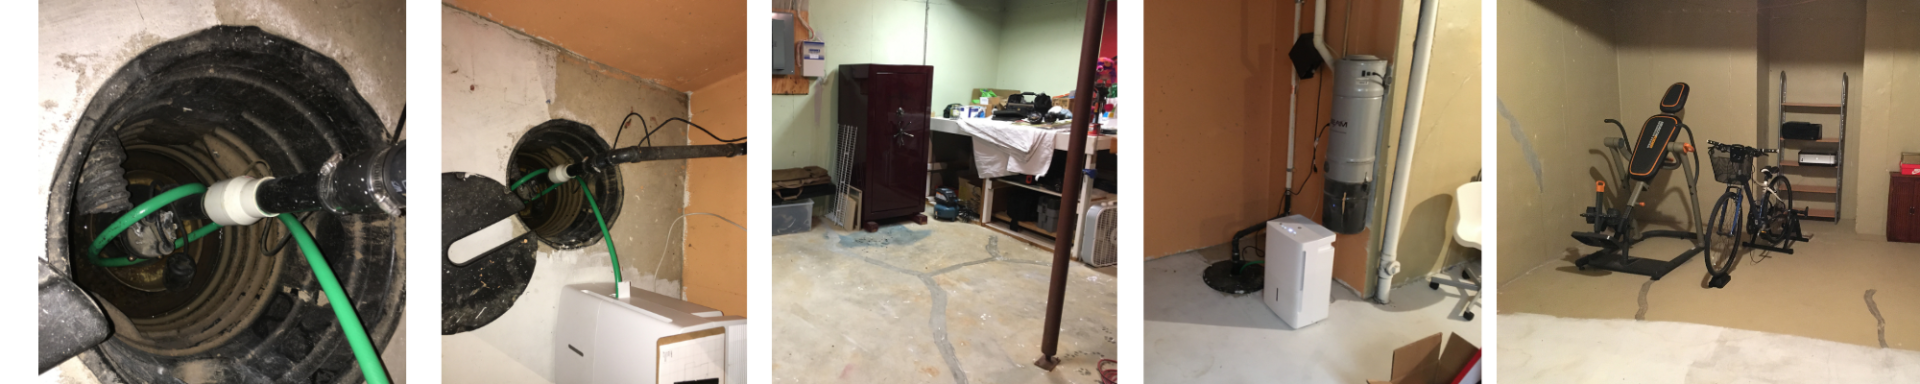 5 photos showing the sump pump being repaired and a dry basement